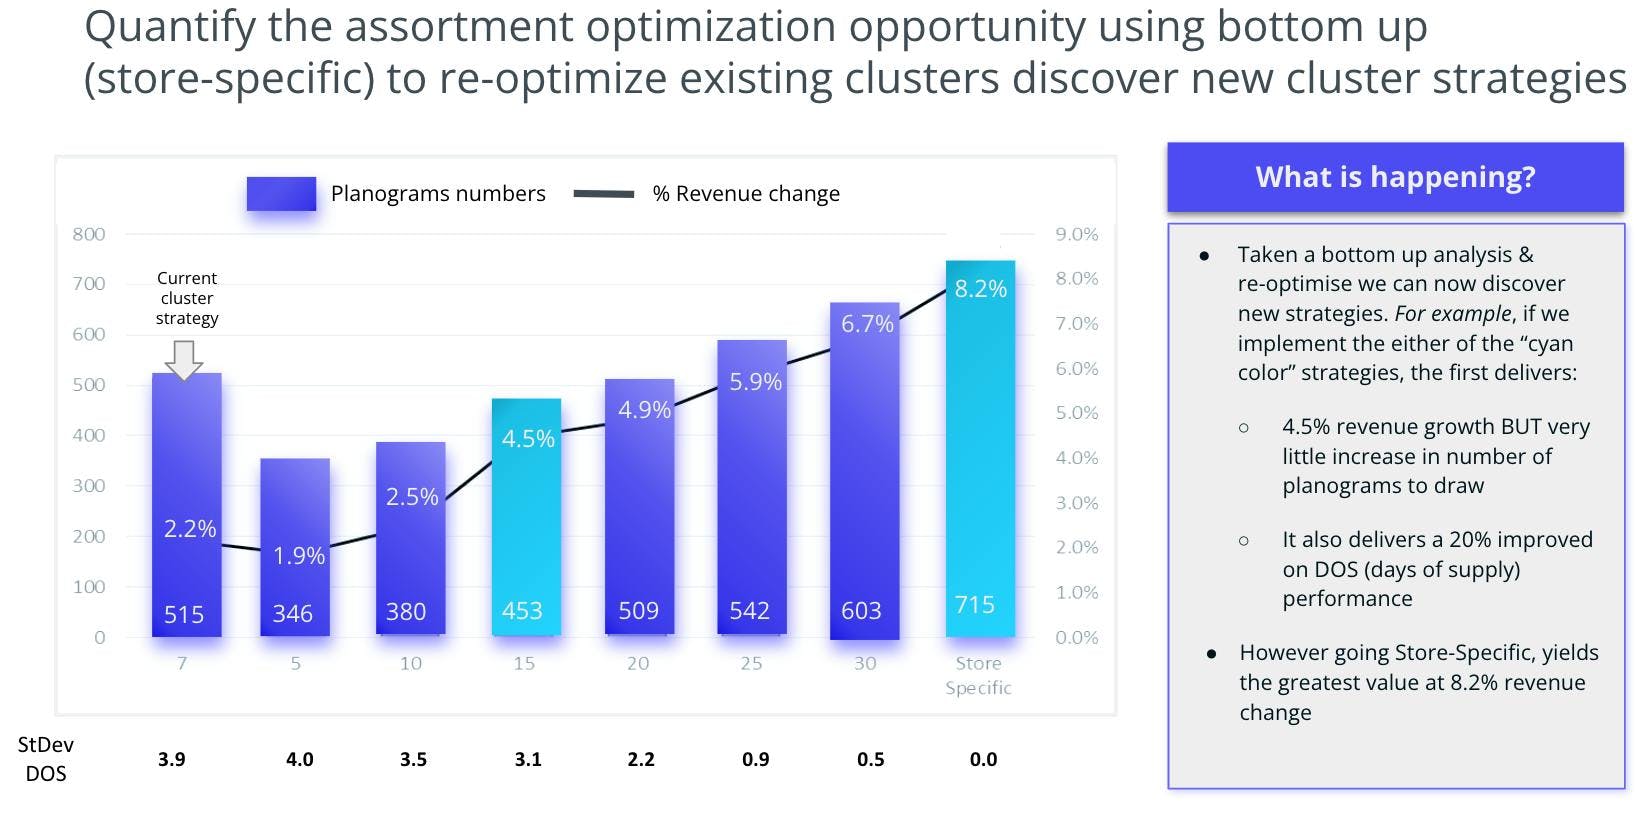 Quantify the assortment optimization opportunity using bottom up (store-specific) to re-optimize existing clusters discover new cluster strategies